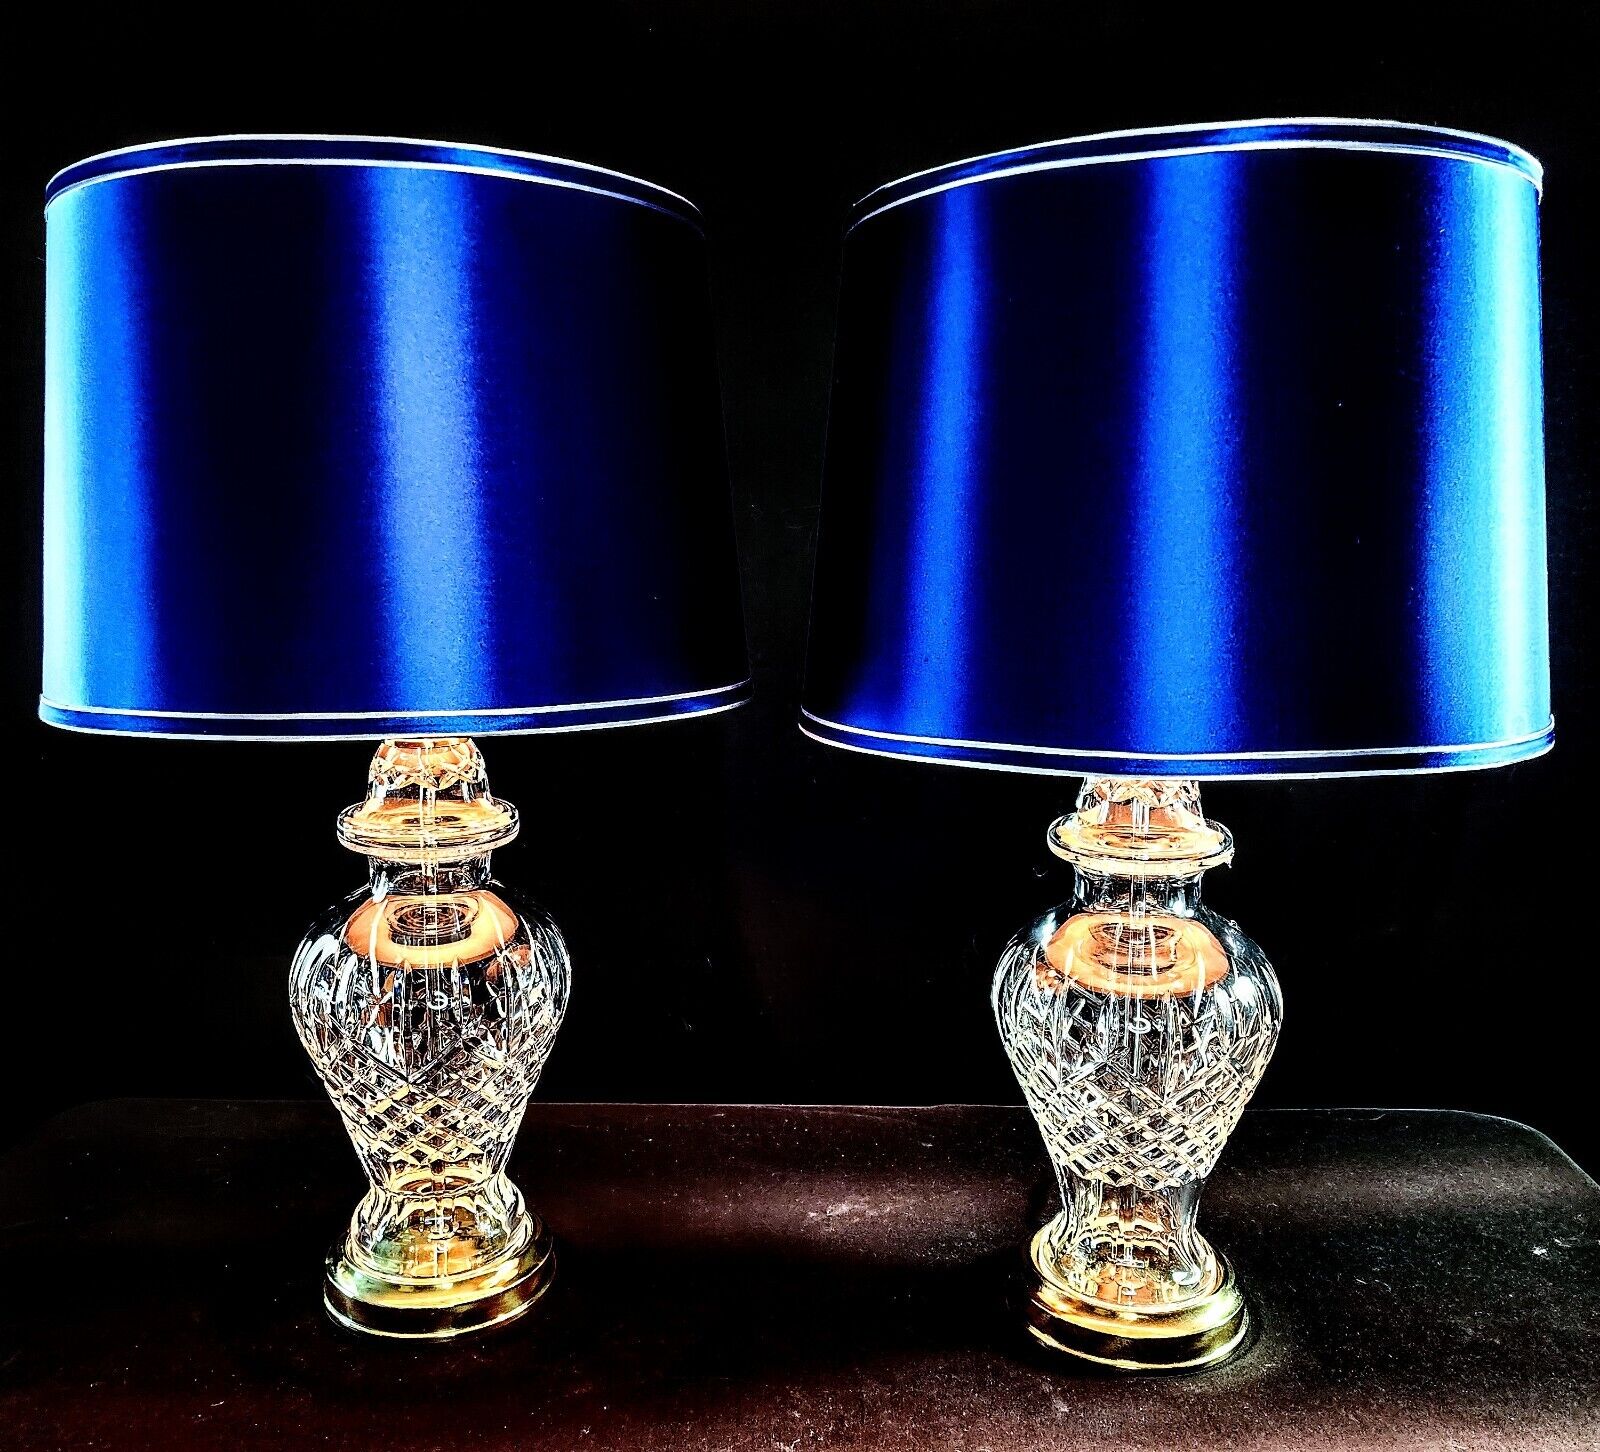 Waterford Araglin Pair of Fine Cut Irish Crystal Urn Style Table Lamps - MINT